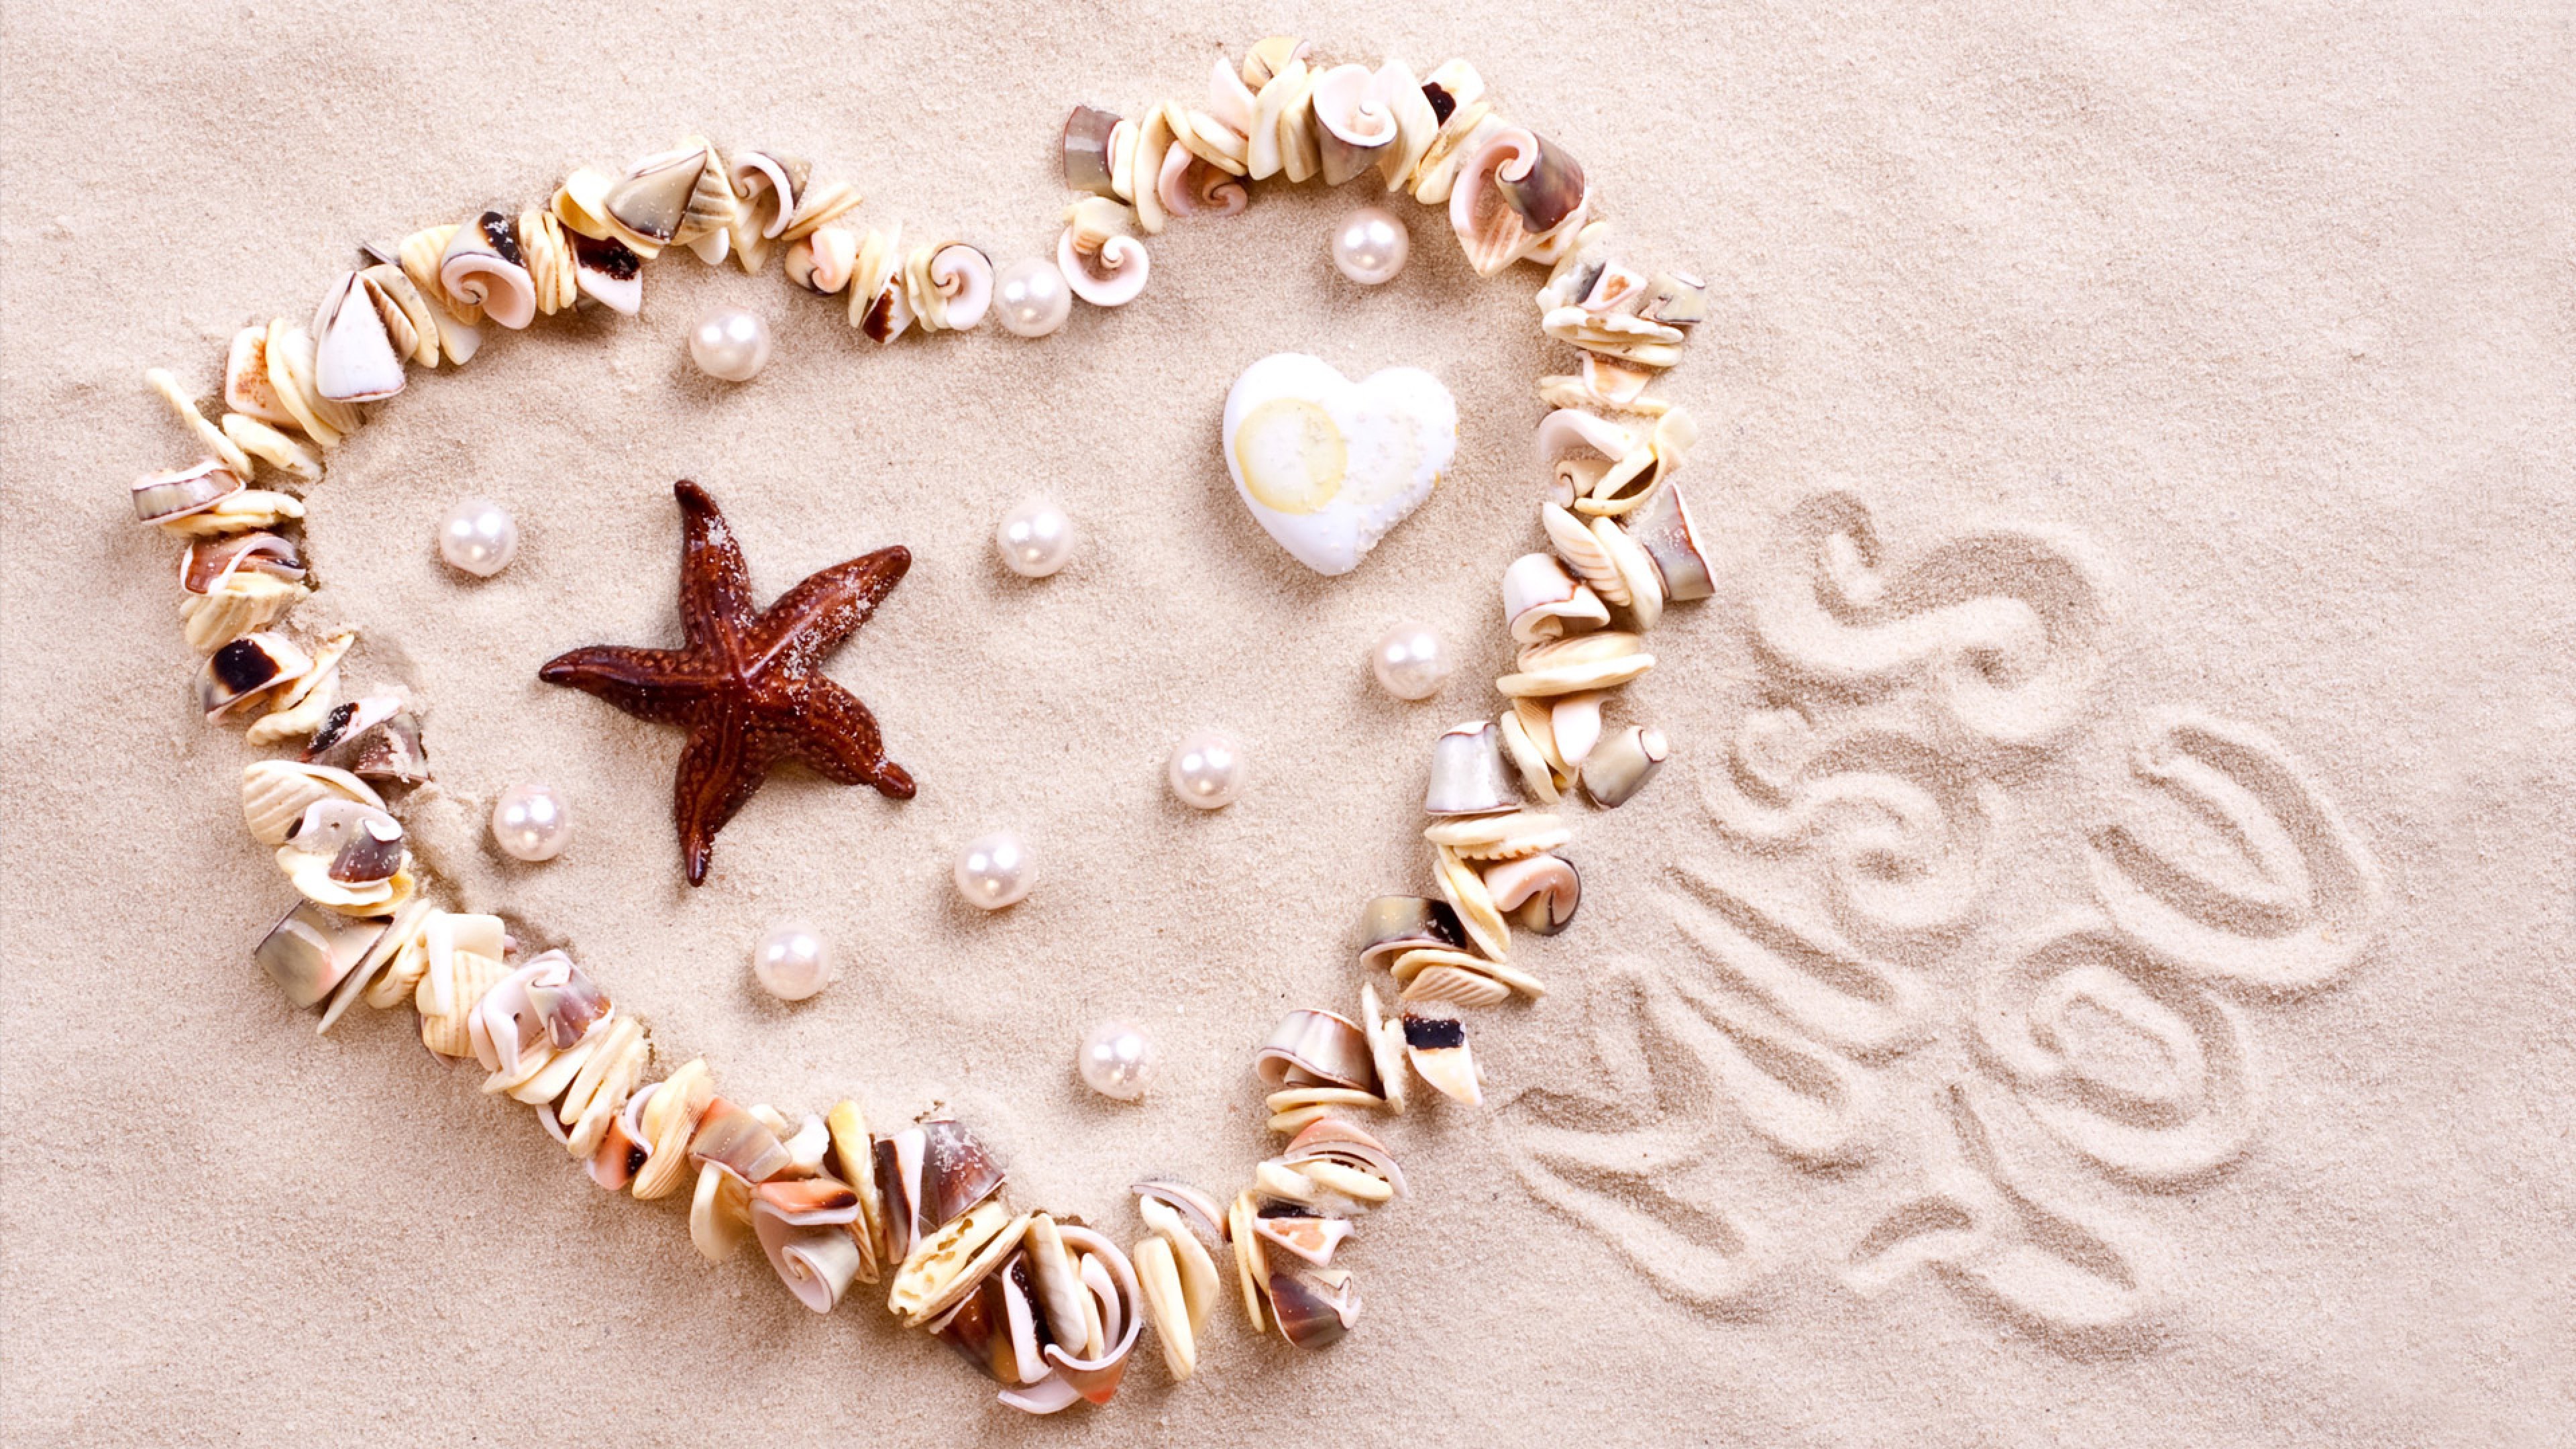 Stock Images love image, heart, starfish, shell, shore, 4k, Stock Images